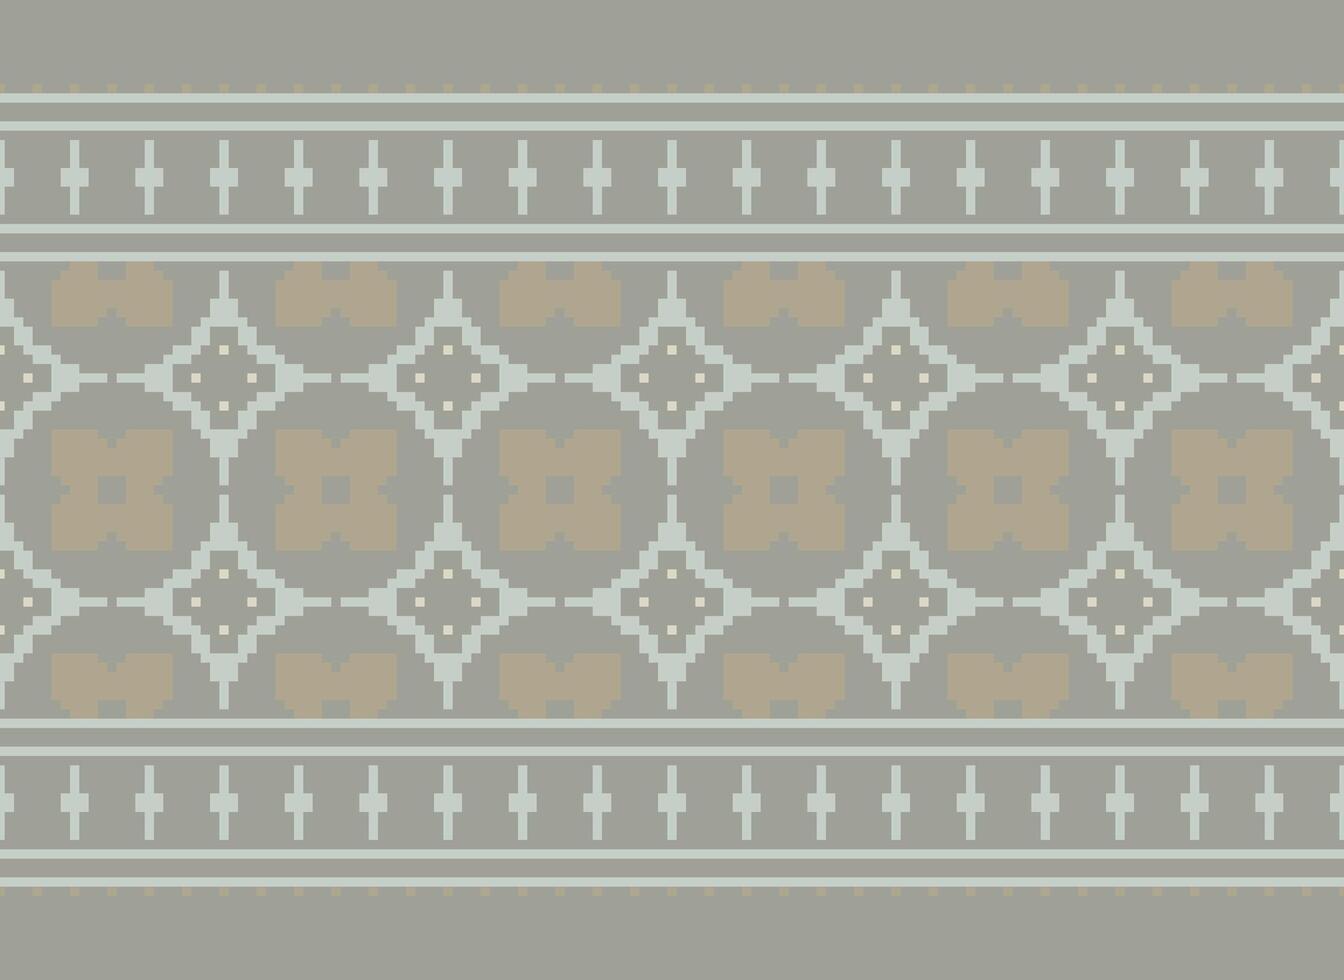 A Floral pixel art pattern on grey background.geometric ethnic oriental embroidery vector illustration. pixel style, abstract background, cross stitch.design for texture, fabric, cloth, scarf, print